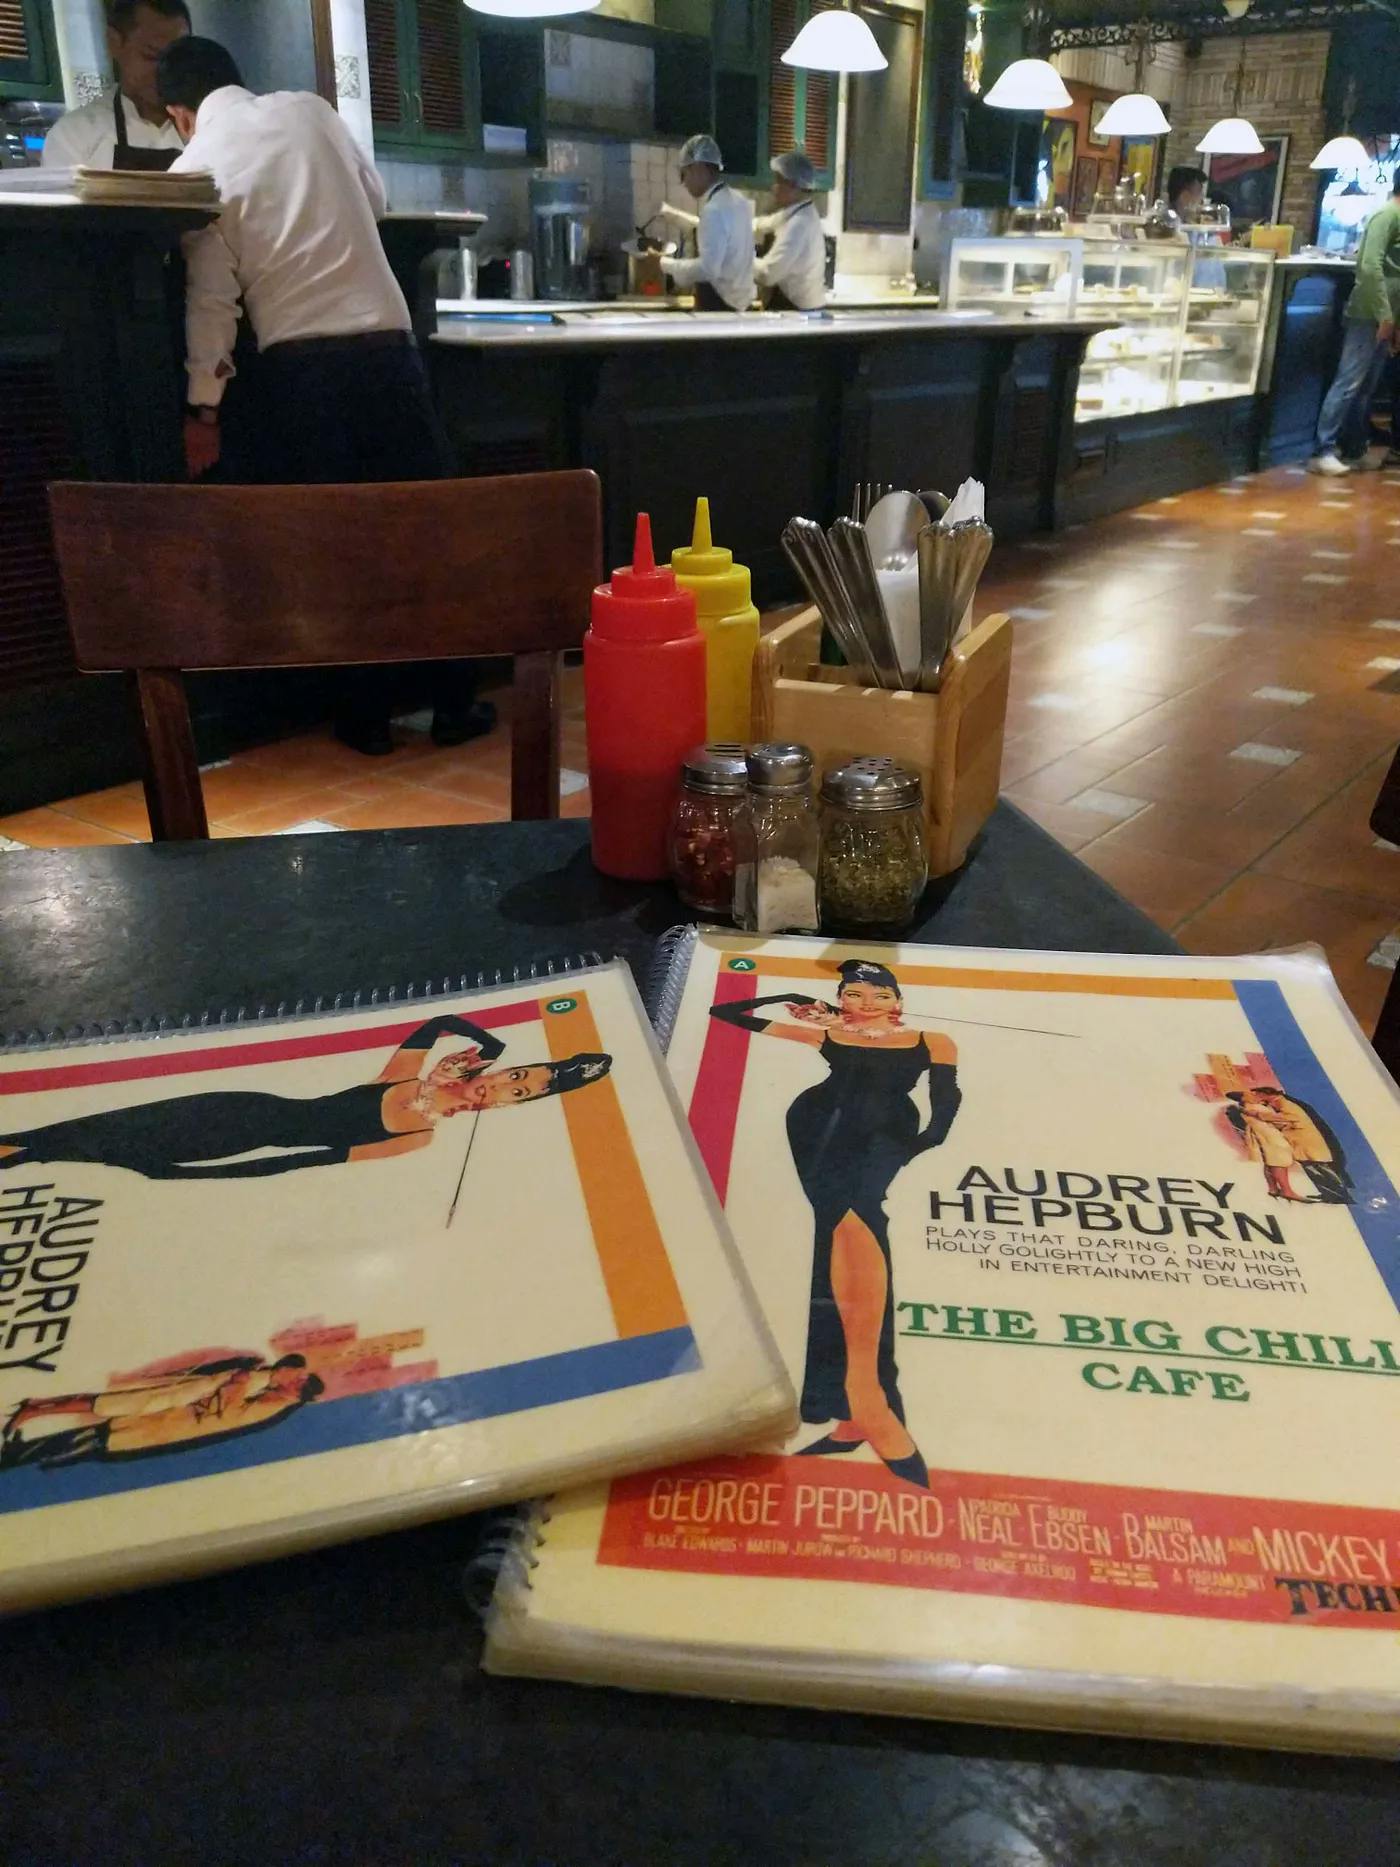 The Big Chill Café's menus laying on a table